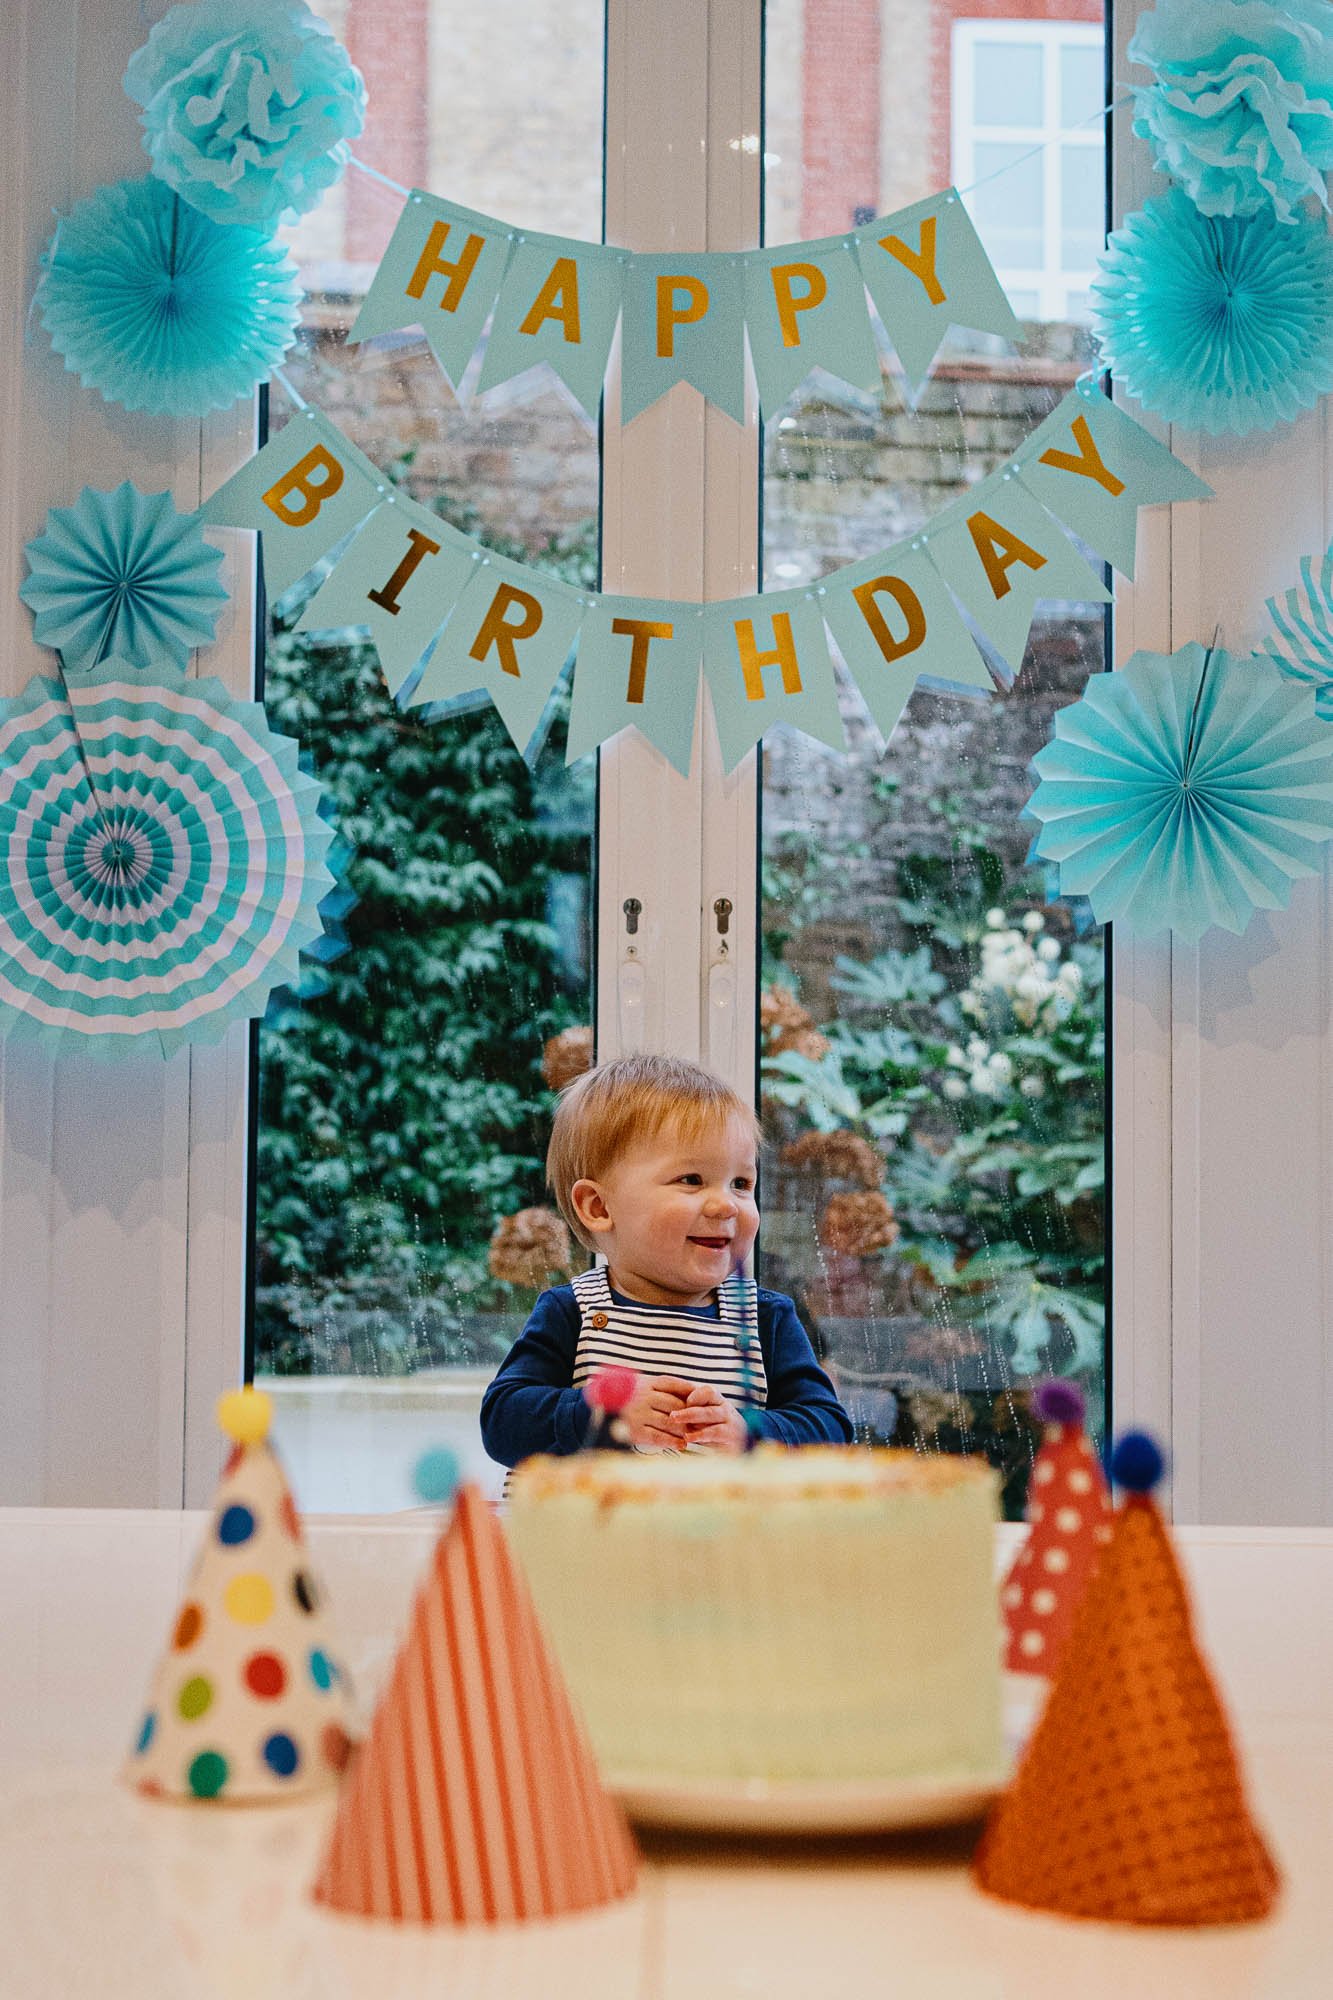 first-birthday-photographer-children-part-at-home-london-brighton-hove-sussex-natural-unposed-family-photography-boy-and-birthday-cake-party-hats-bunting.jpg